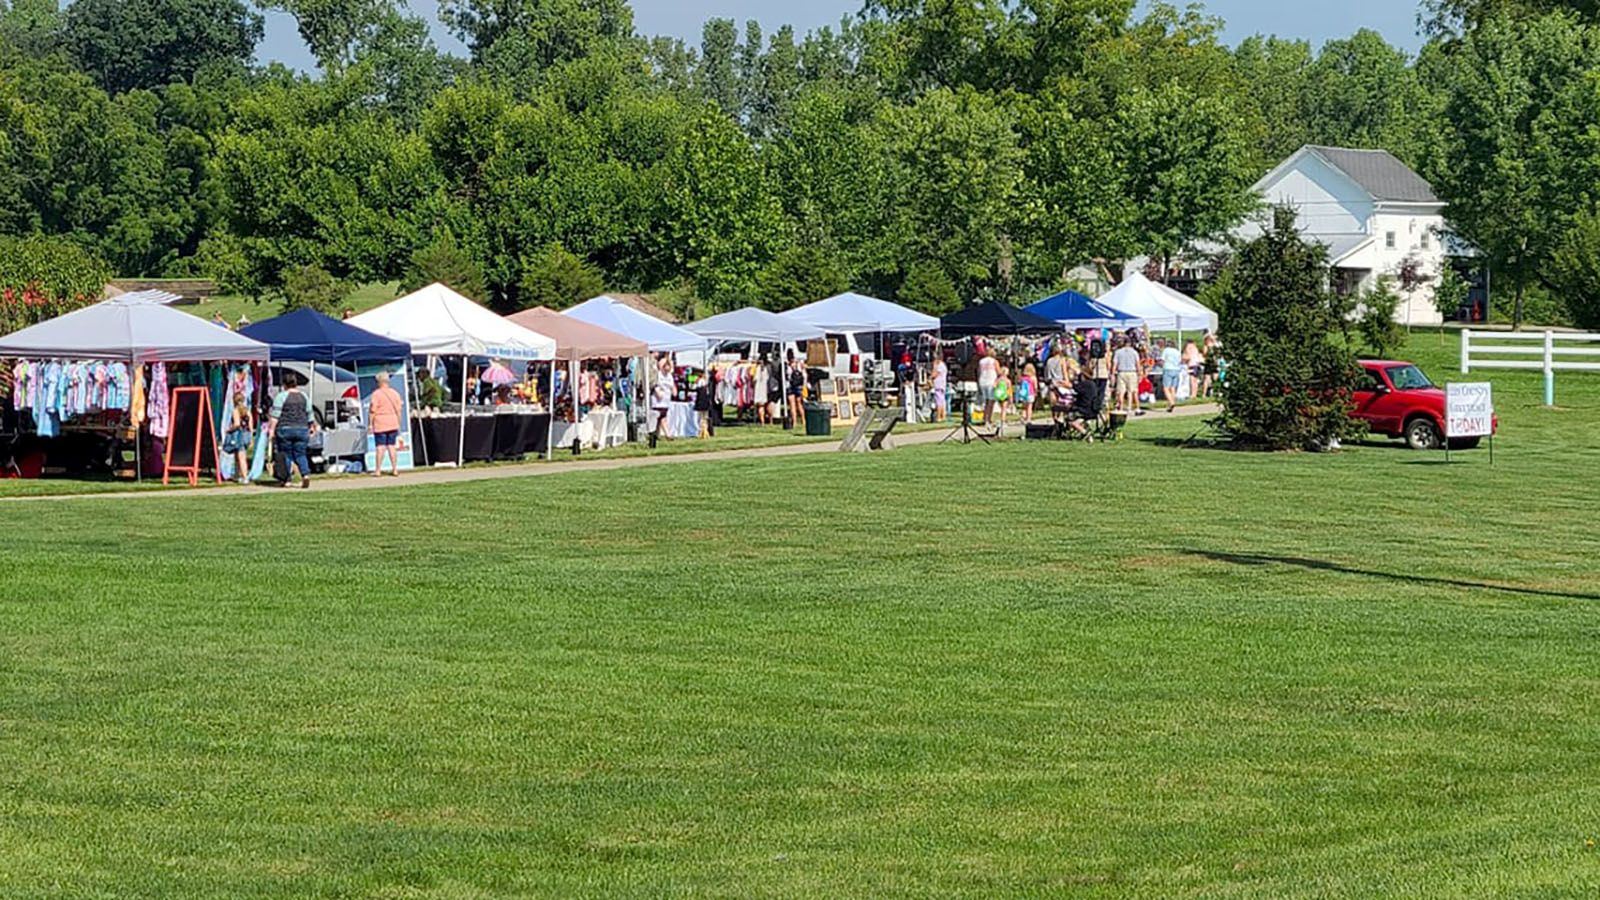 The first Allen County Marketplace of the year will be Saturday, May 13.